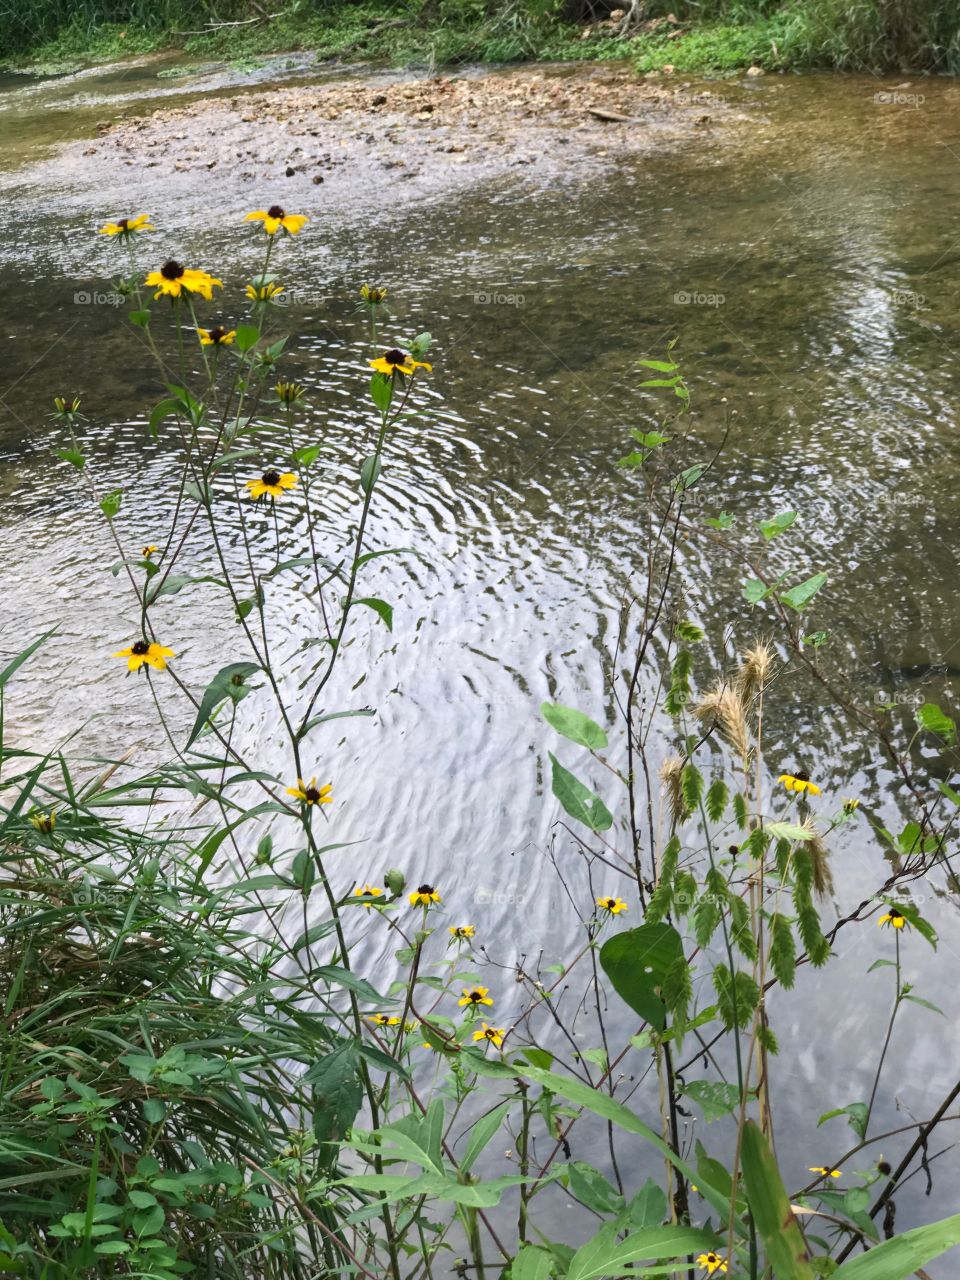 Country scenery with flowers near a creek